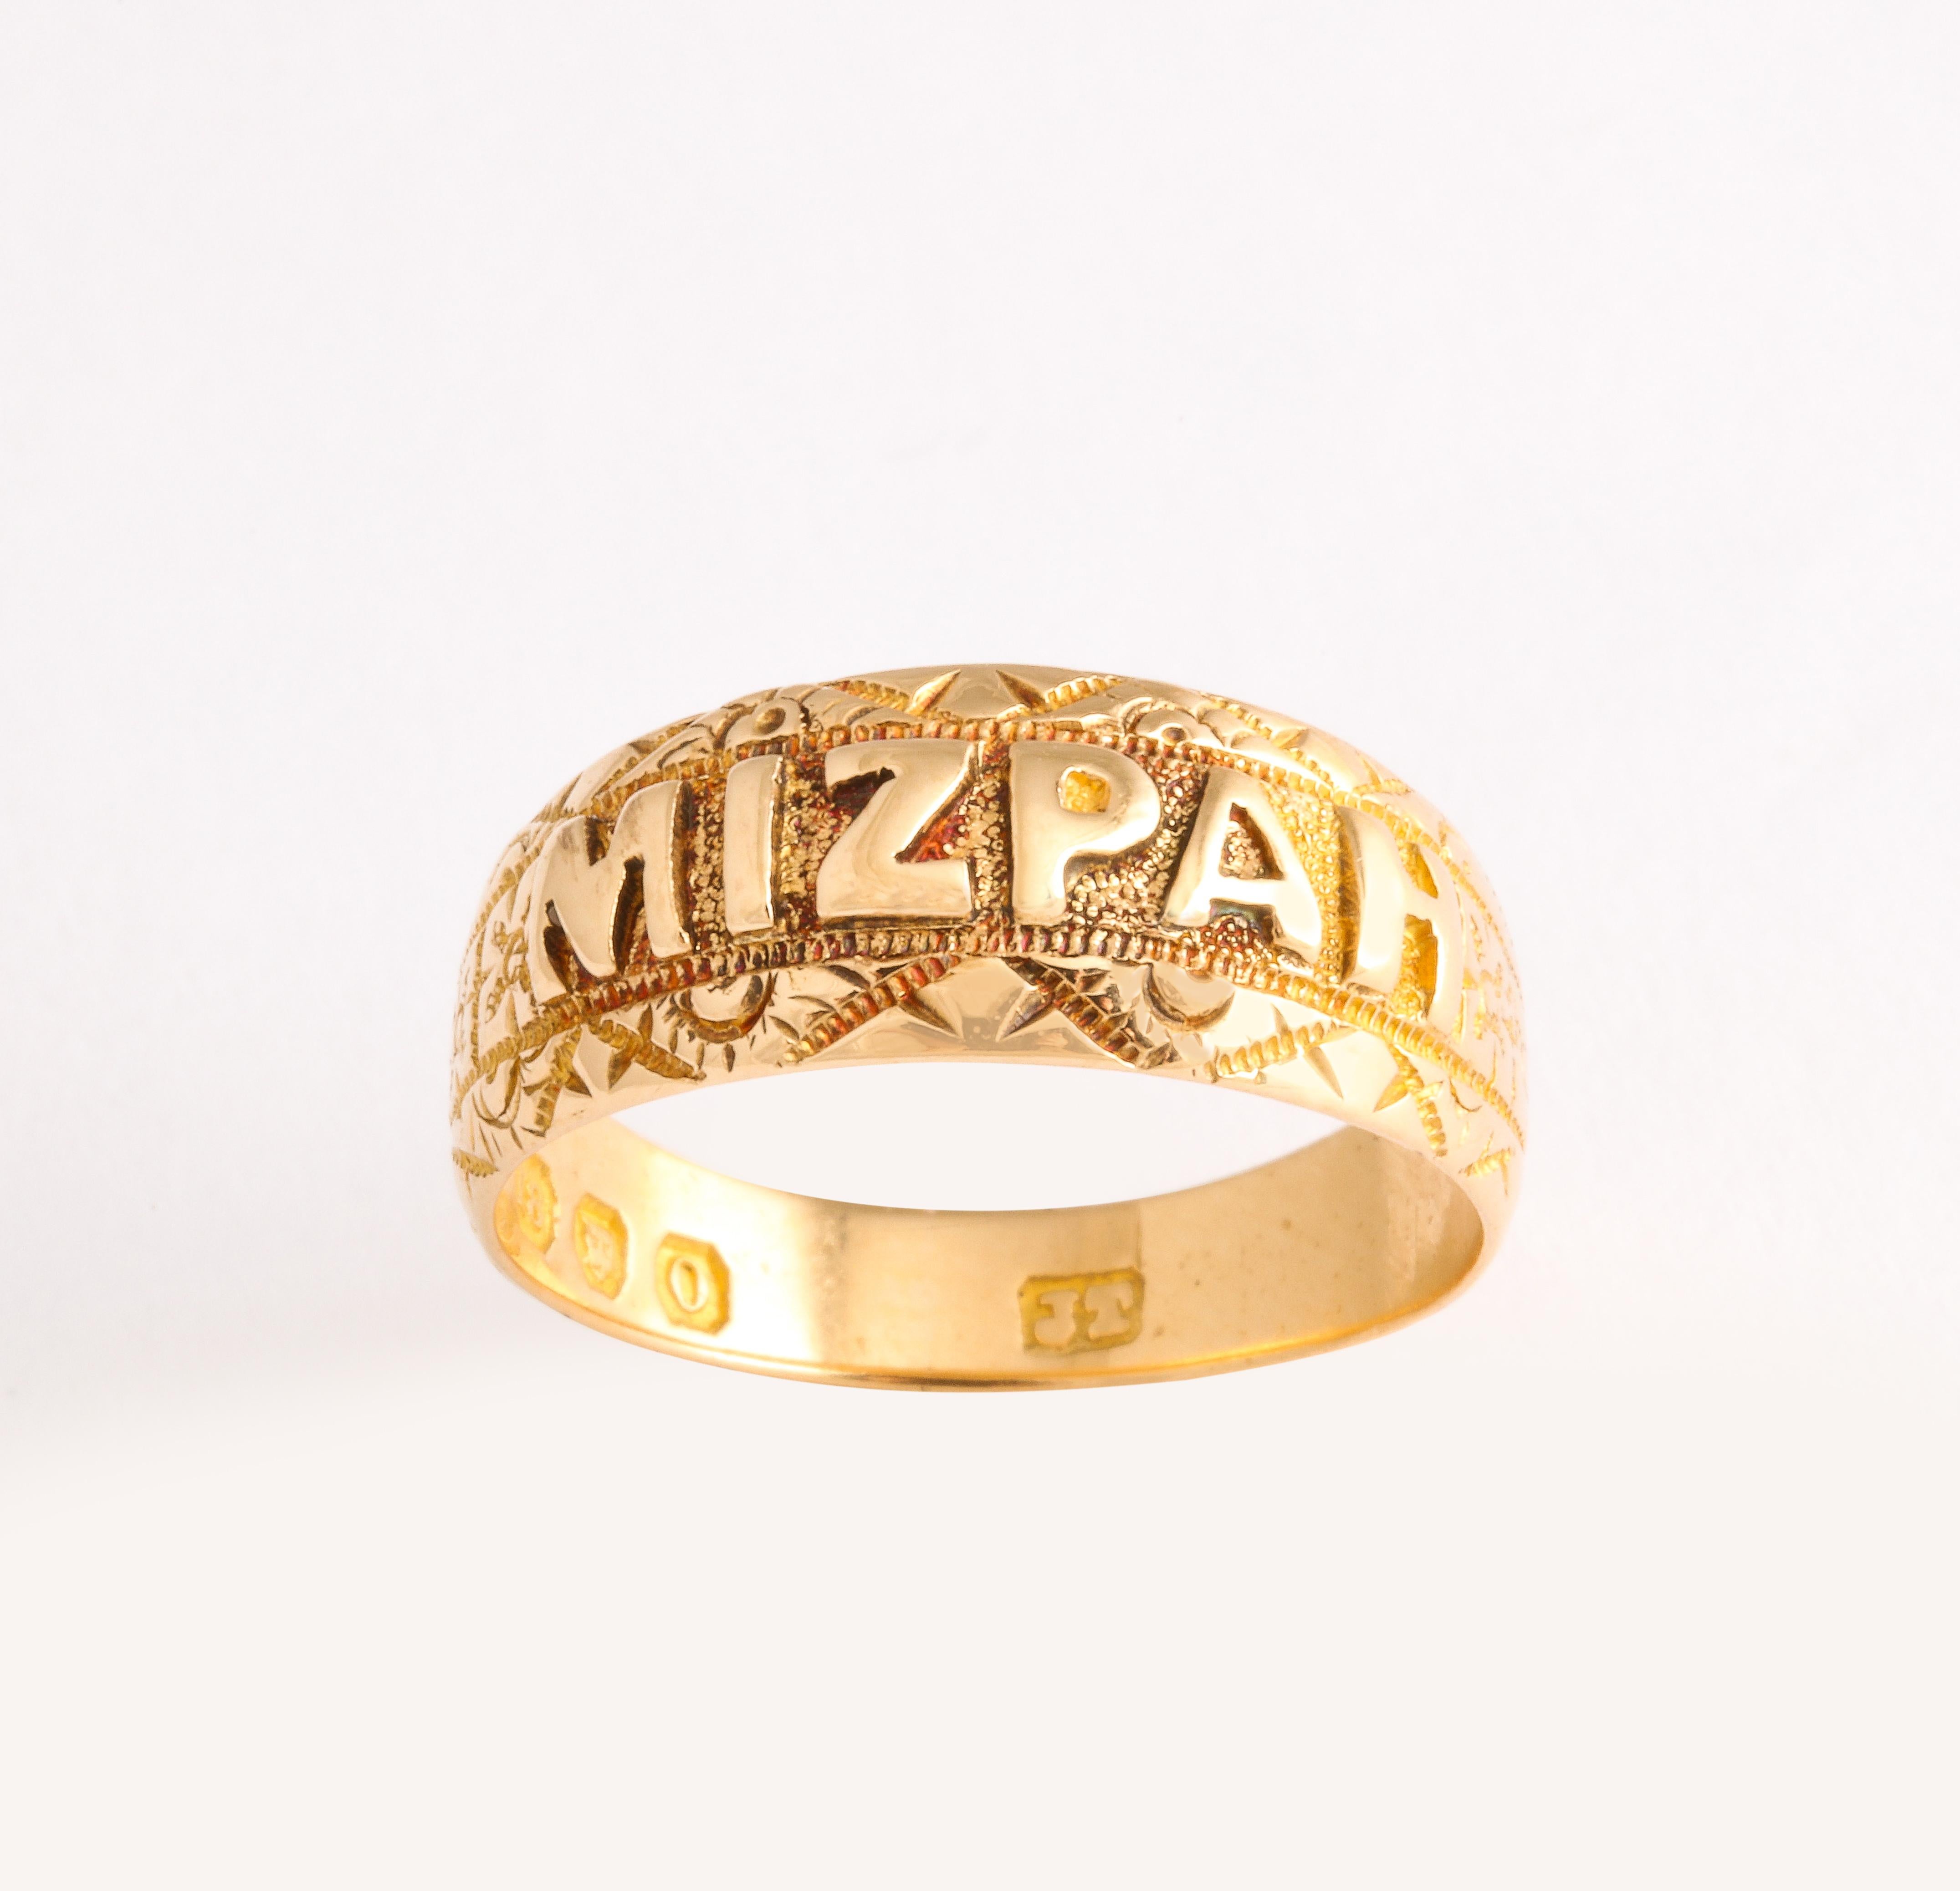 A solid substantial 18 kt gold Mizpah ring reminds you that you are being looked after with love.  Raised above a hammered background Bold Letters come forward spelling MiIZPAH which is a Hebrew word meaning Watchtower. The loose translation often